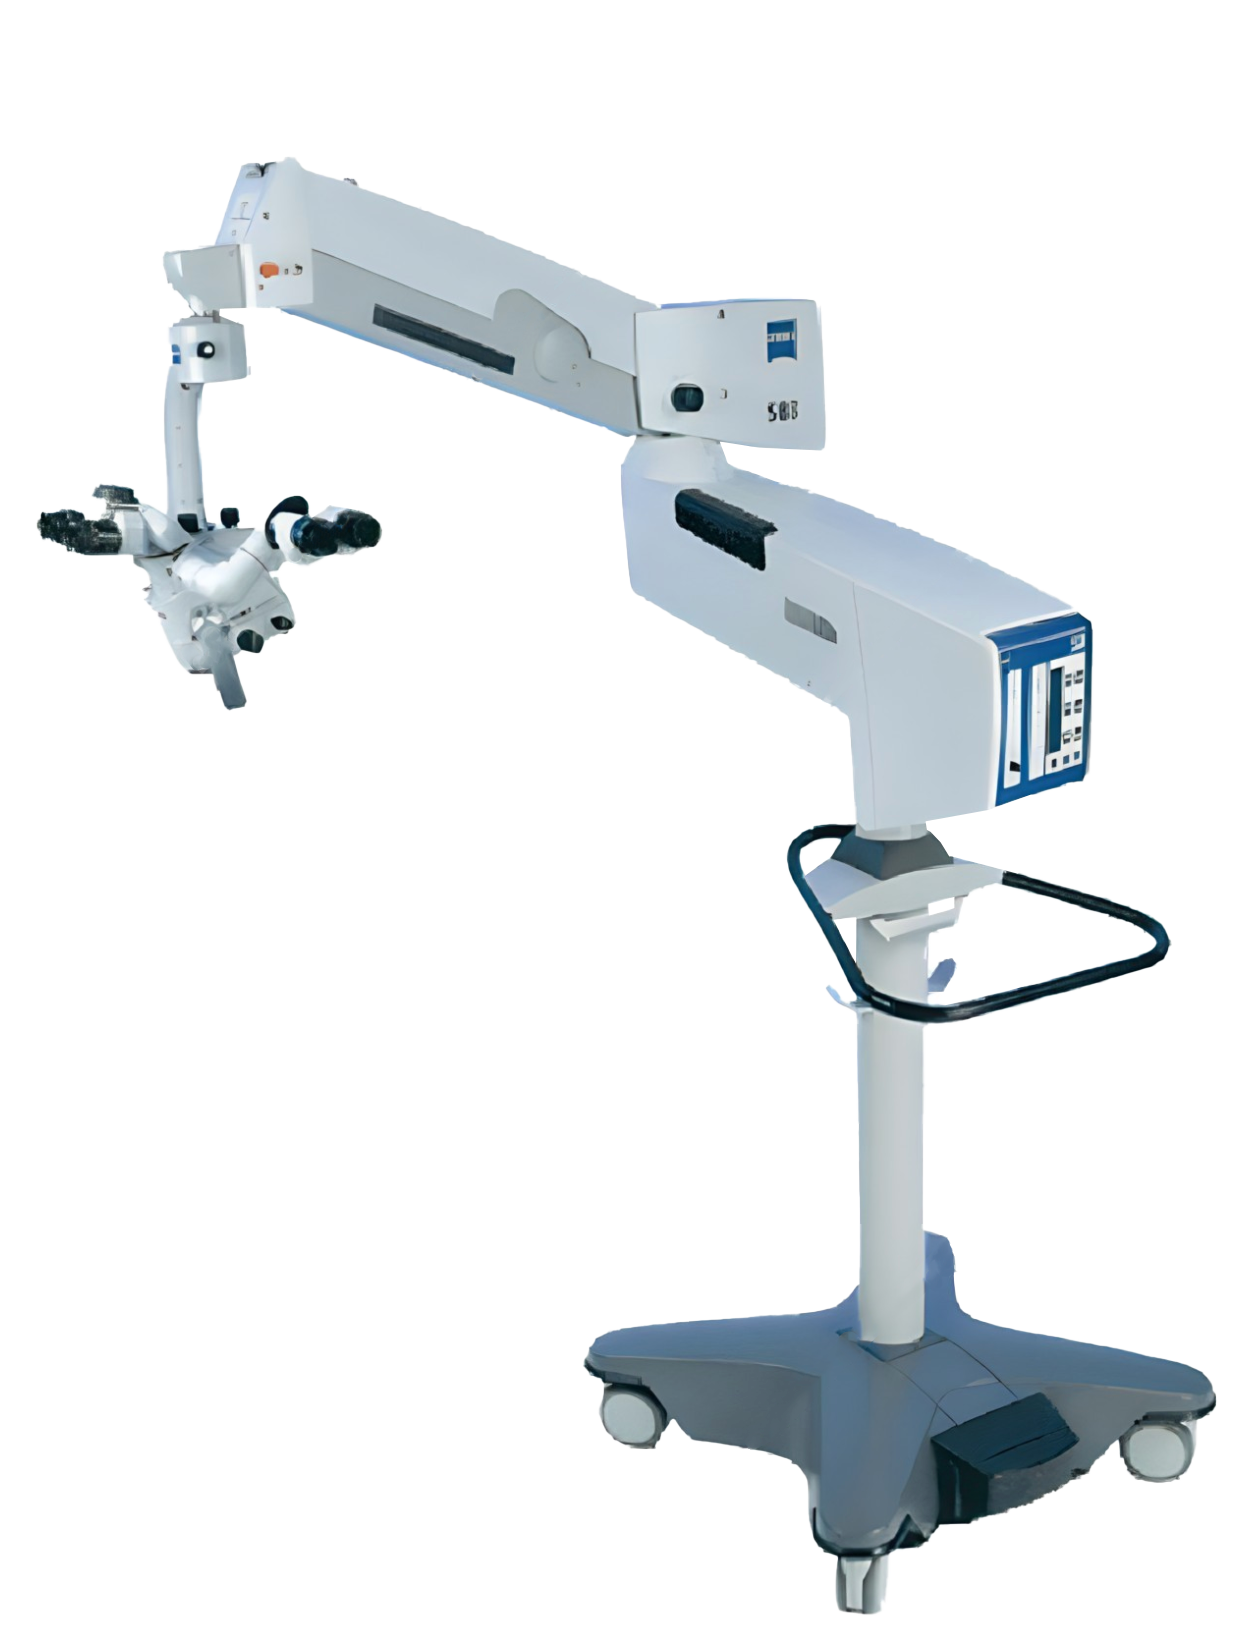 Zeiss OPMI Vario S88 Surgical Microscope